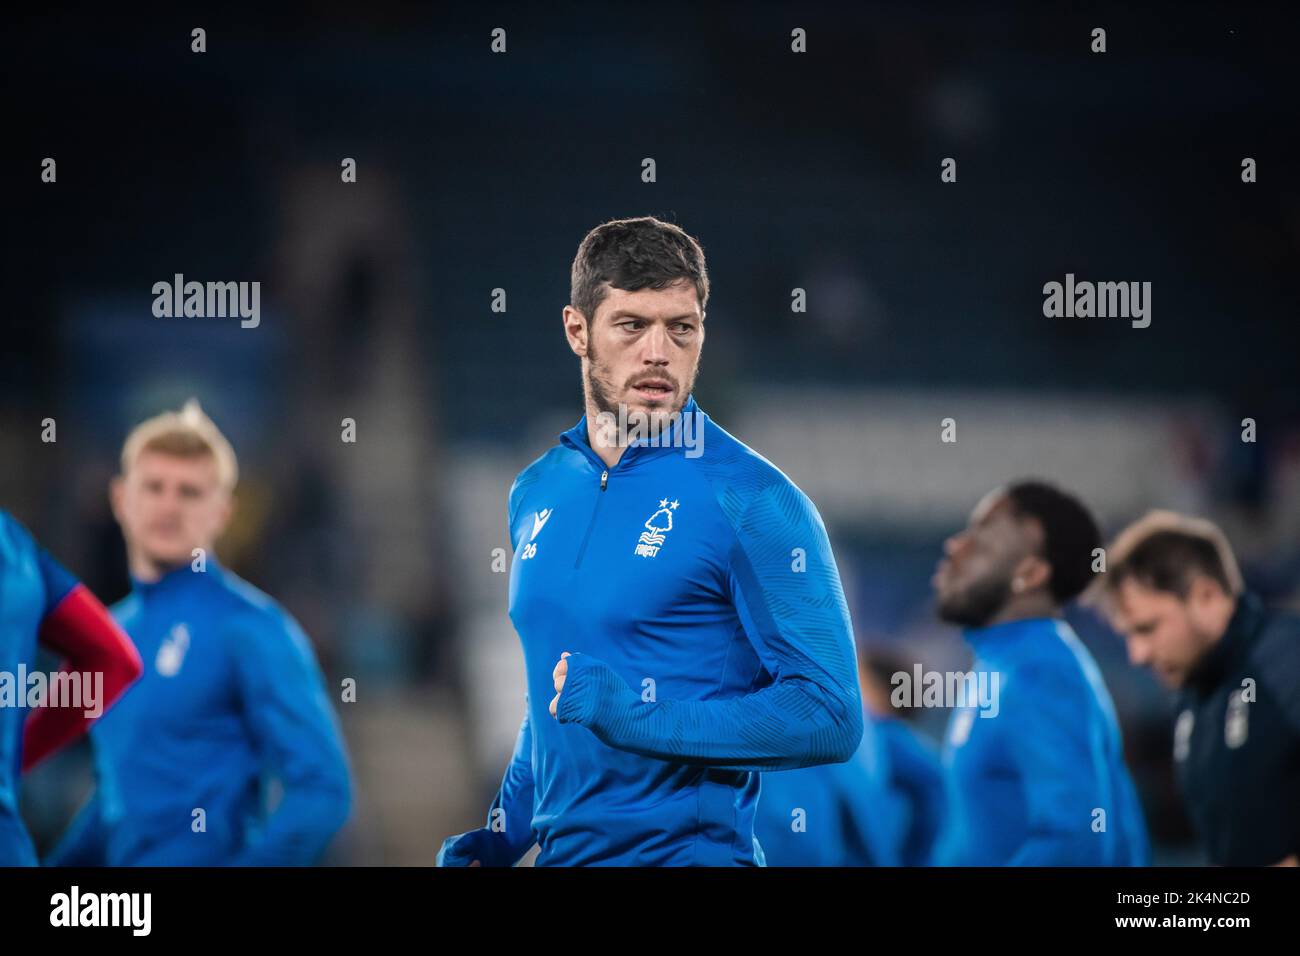 Scott McKenna #26 of Nottingham Forest warms up before the Premier League match Leicester City vs Nottingham Forest at King Power Stadium, Leicester, United Kingdom, 3rd October 2022  (Photo by Ritchie Sumpter/News Images) Stock Photo